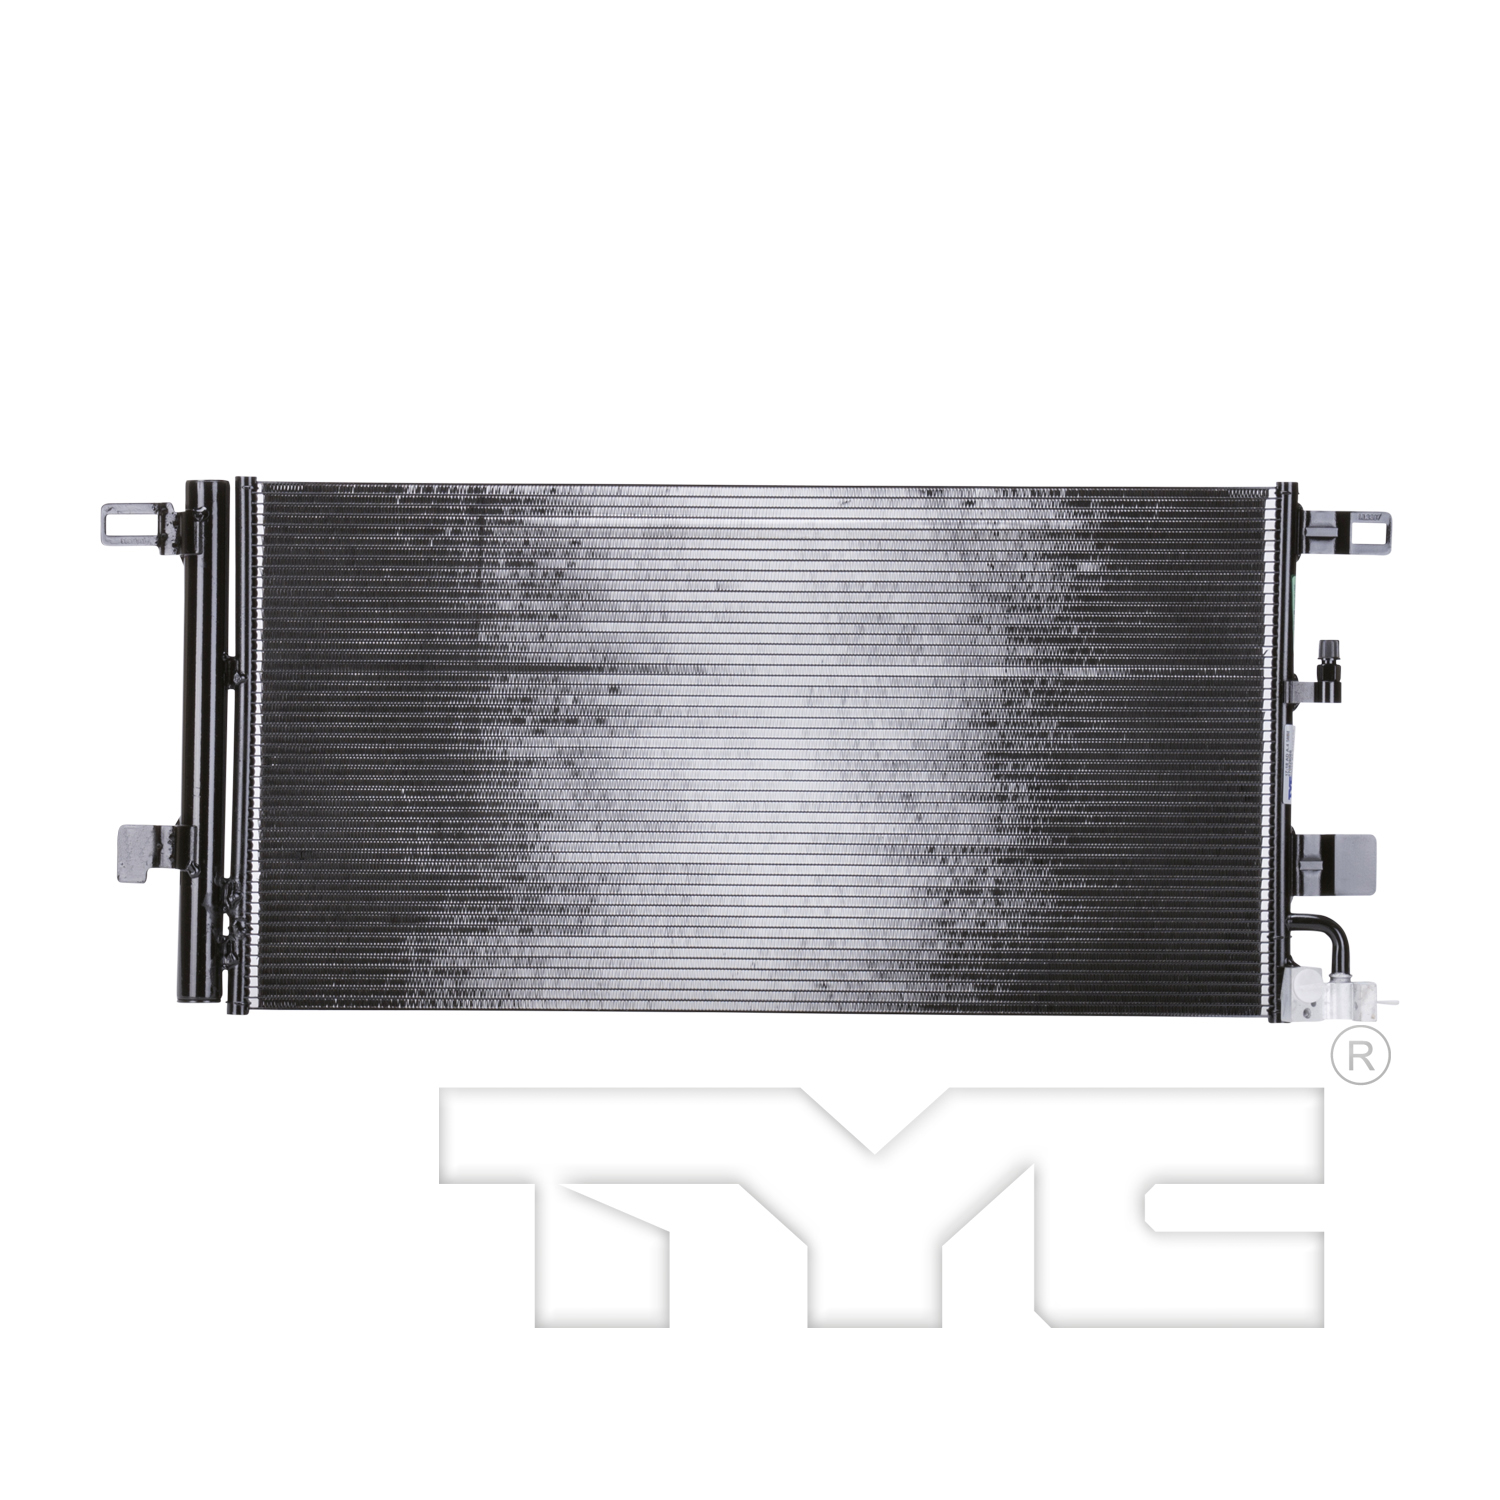 Aftermarket AC CONDENSERS for AUDI - A4 ALLROAD, A4 ALLROAD,17-18,Air conditioning condenser